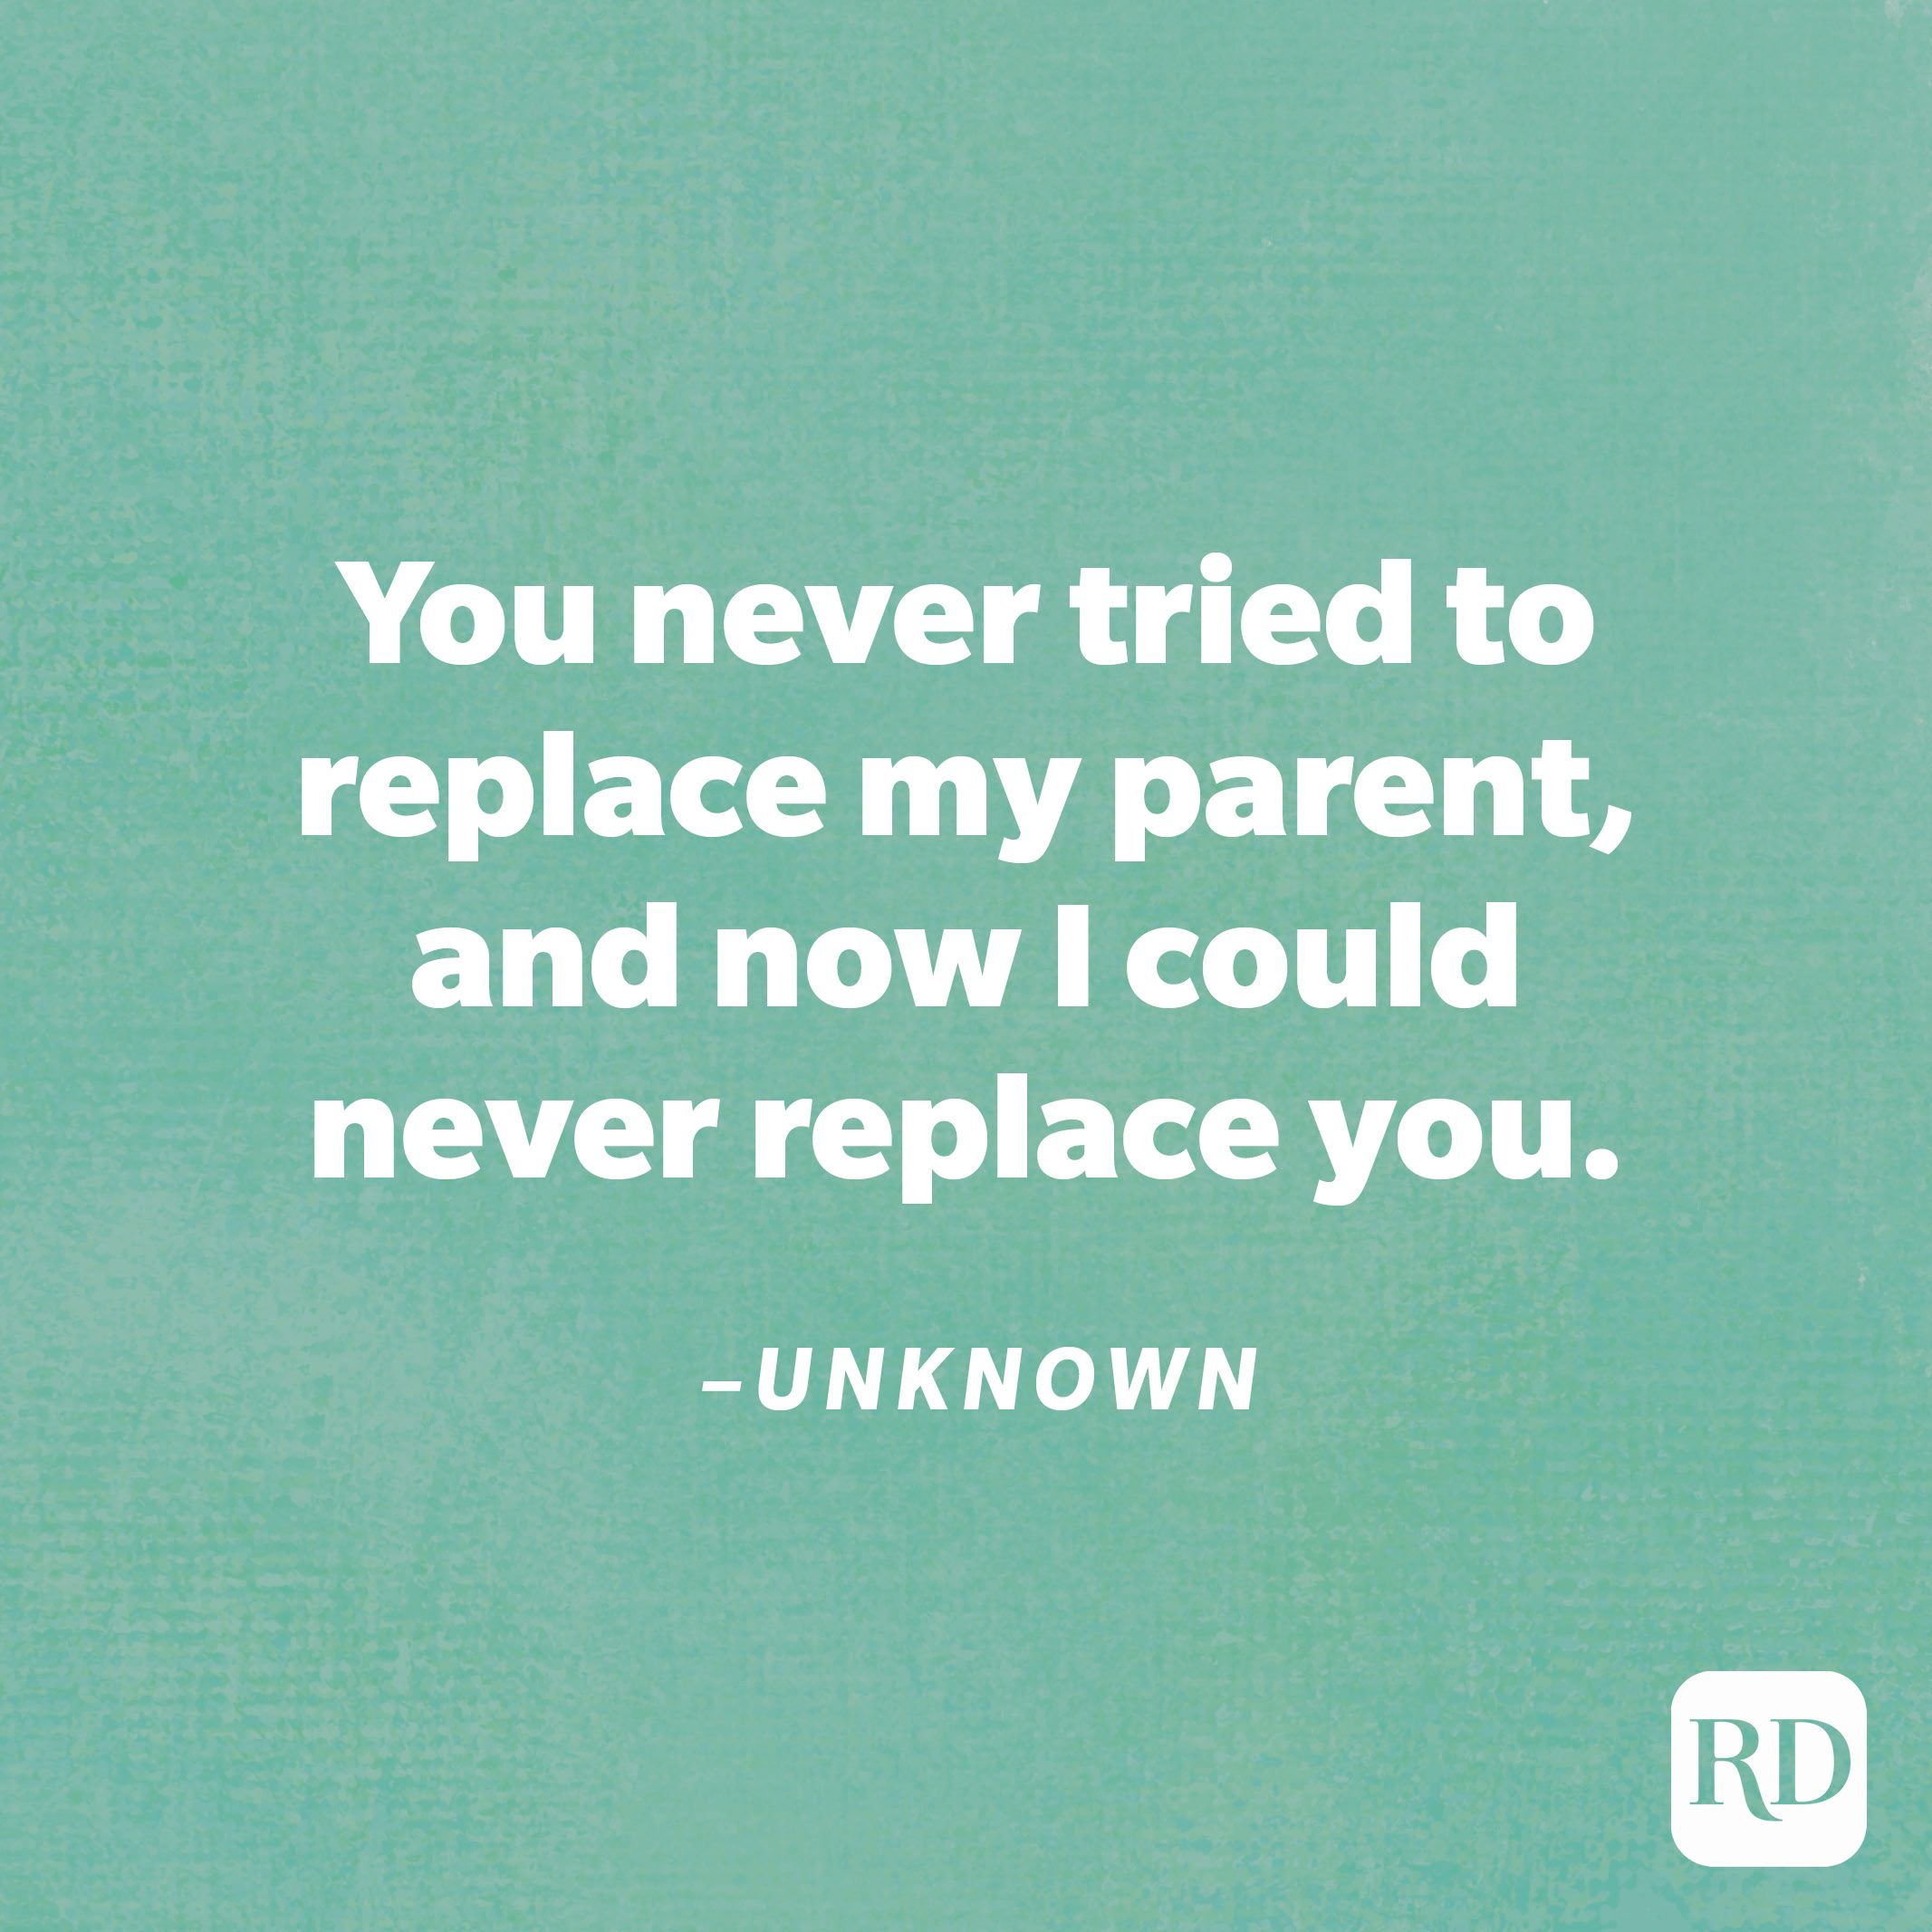 "You never tried to replace my parent, and now I could never replace you."—Unknown